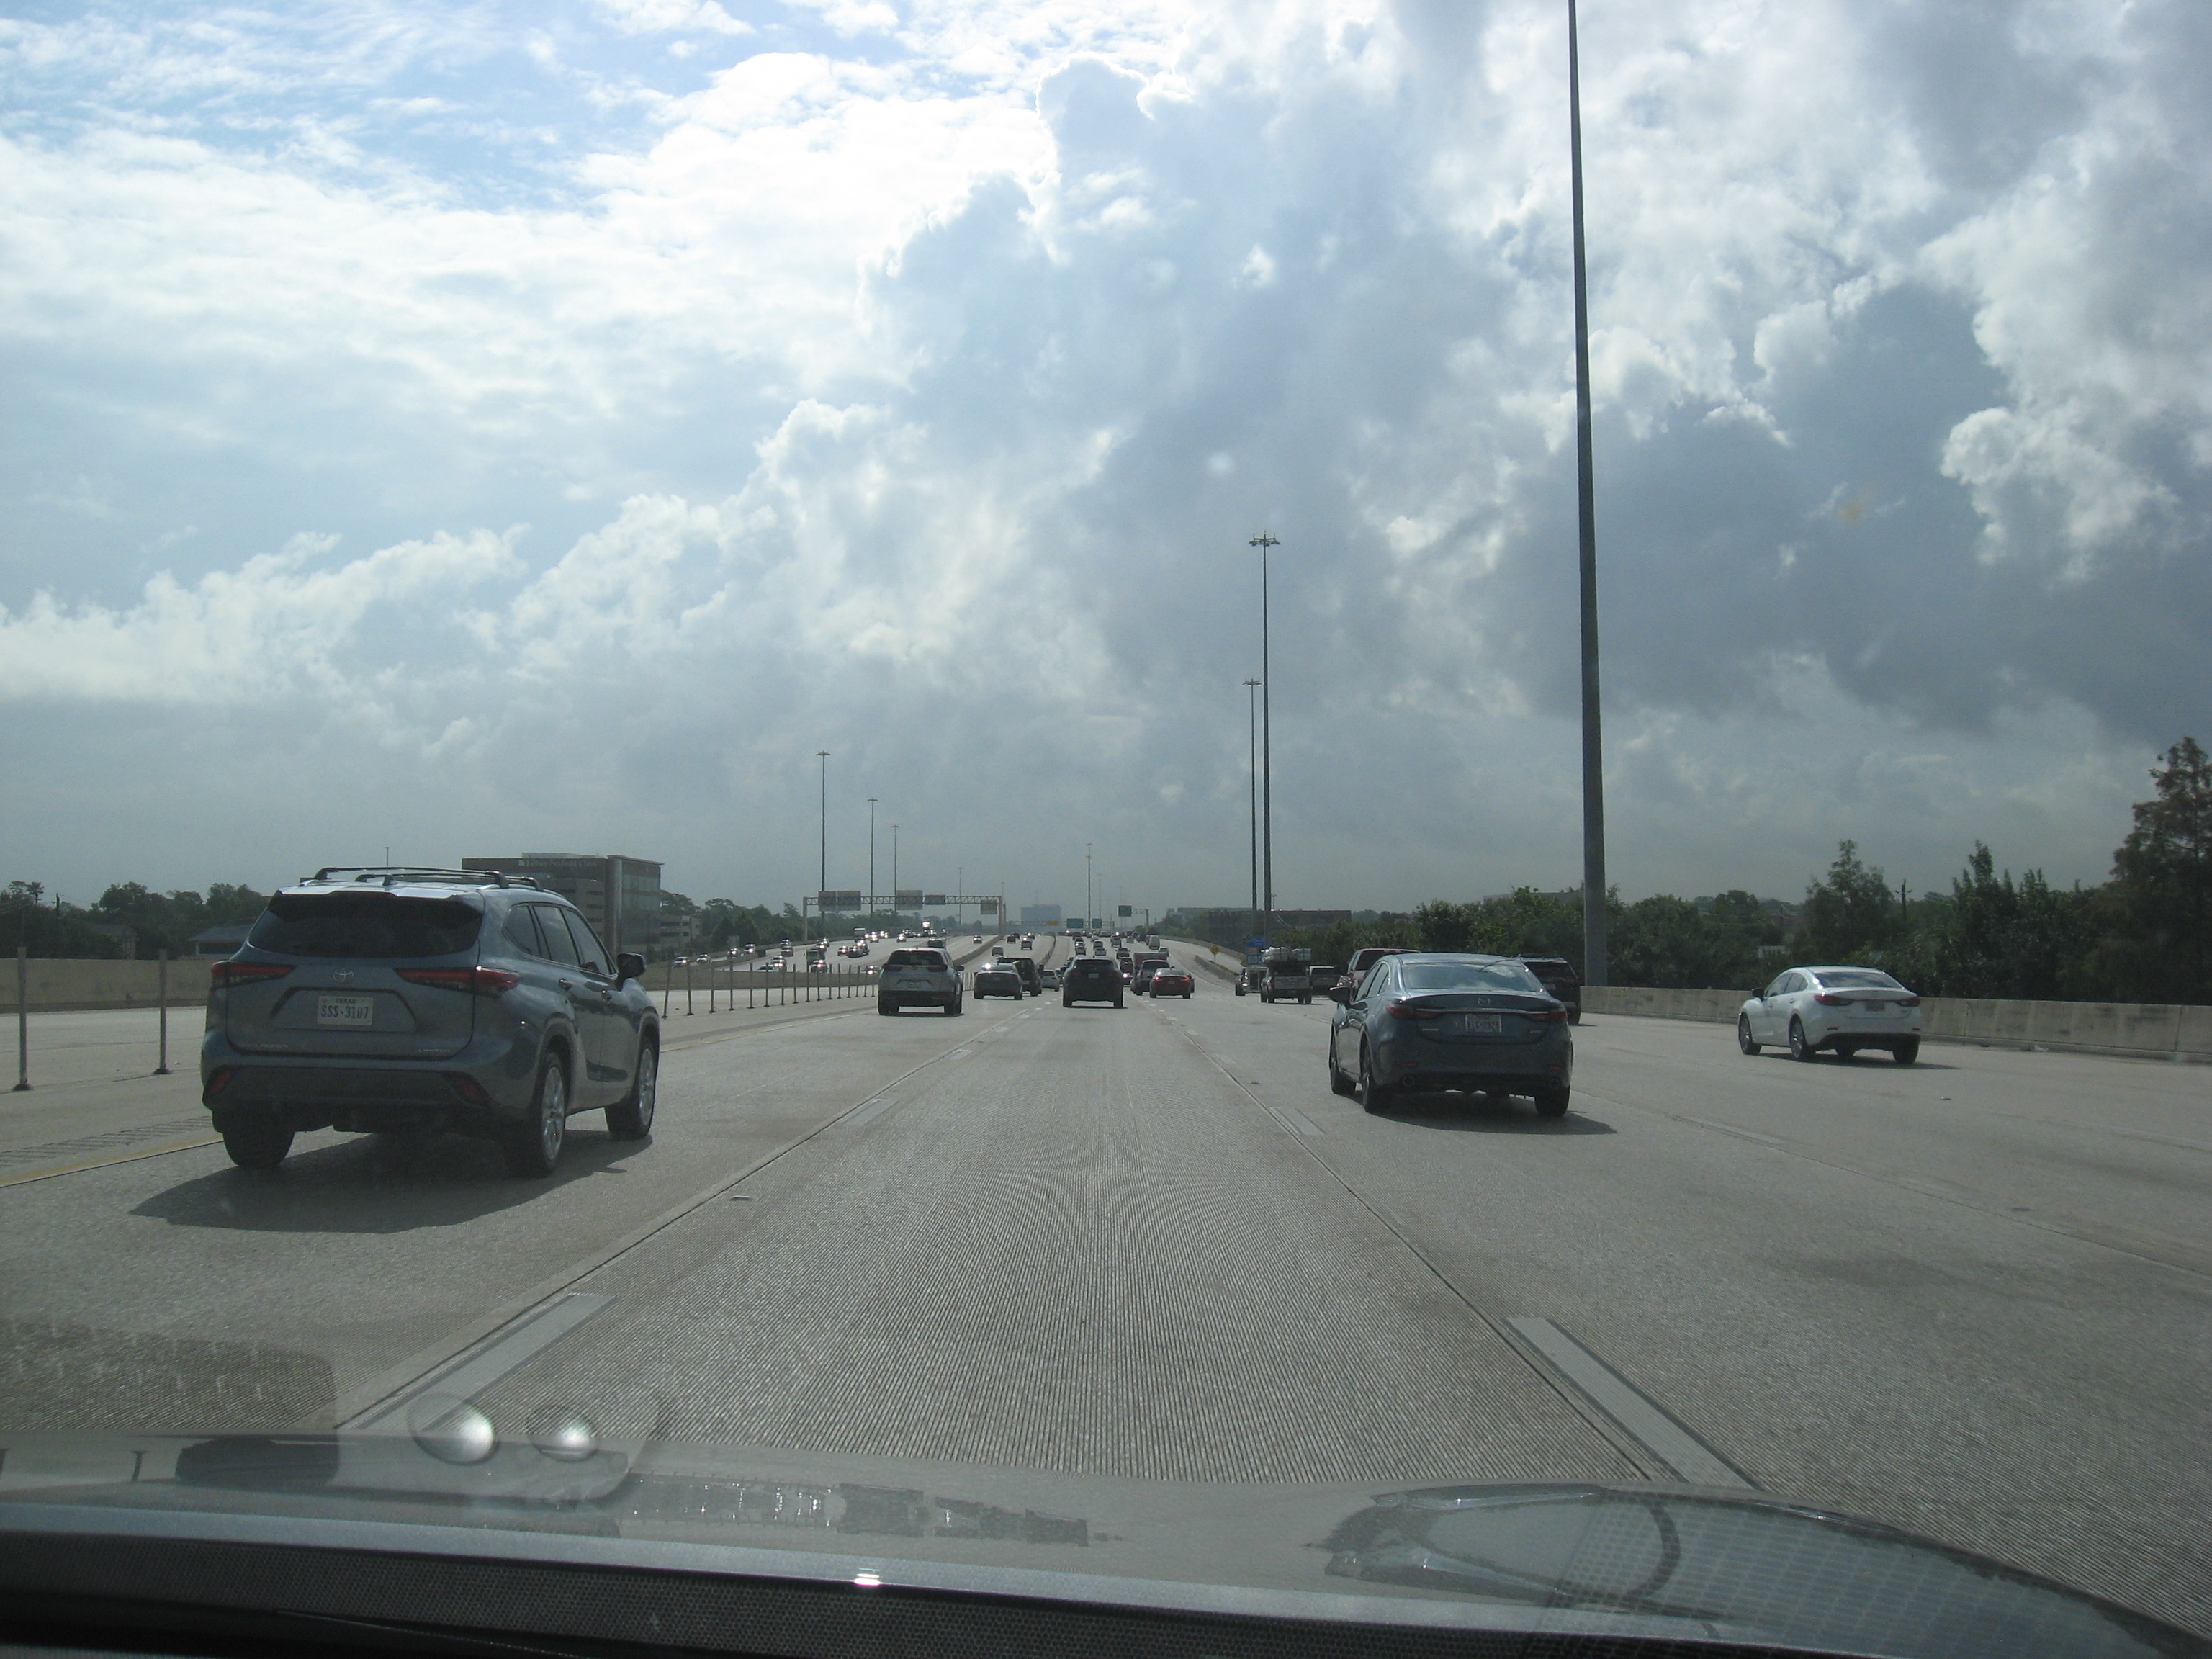 The Katy Freeway, one of the widest freeways in the United States